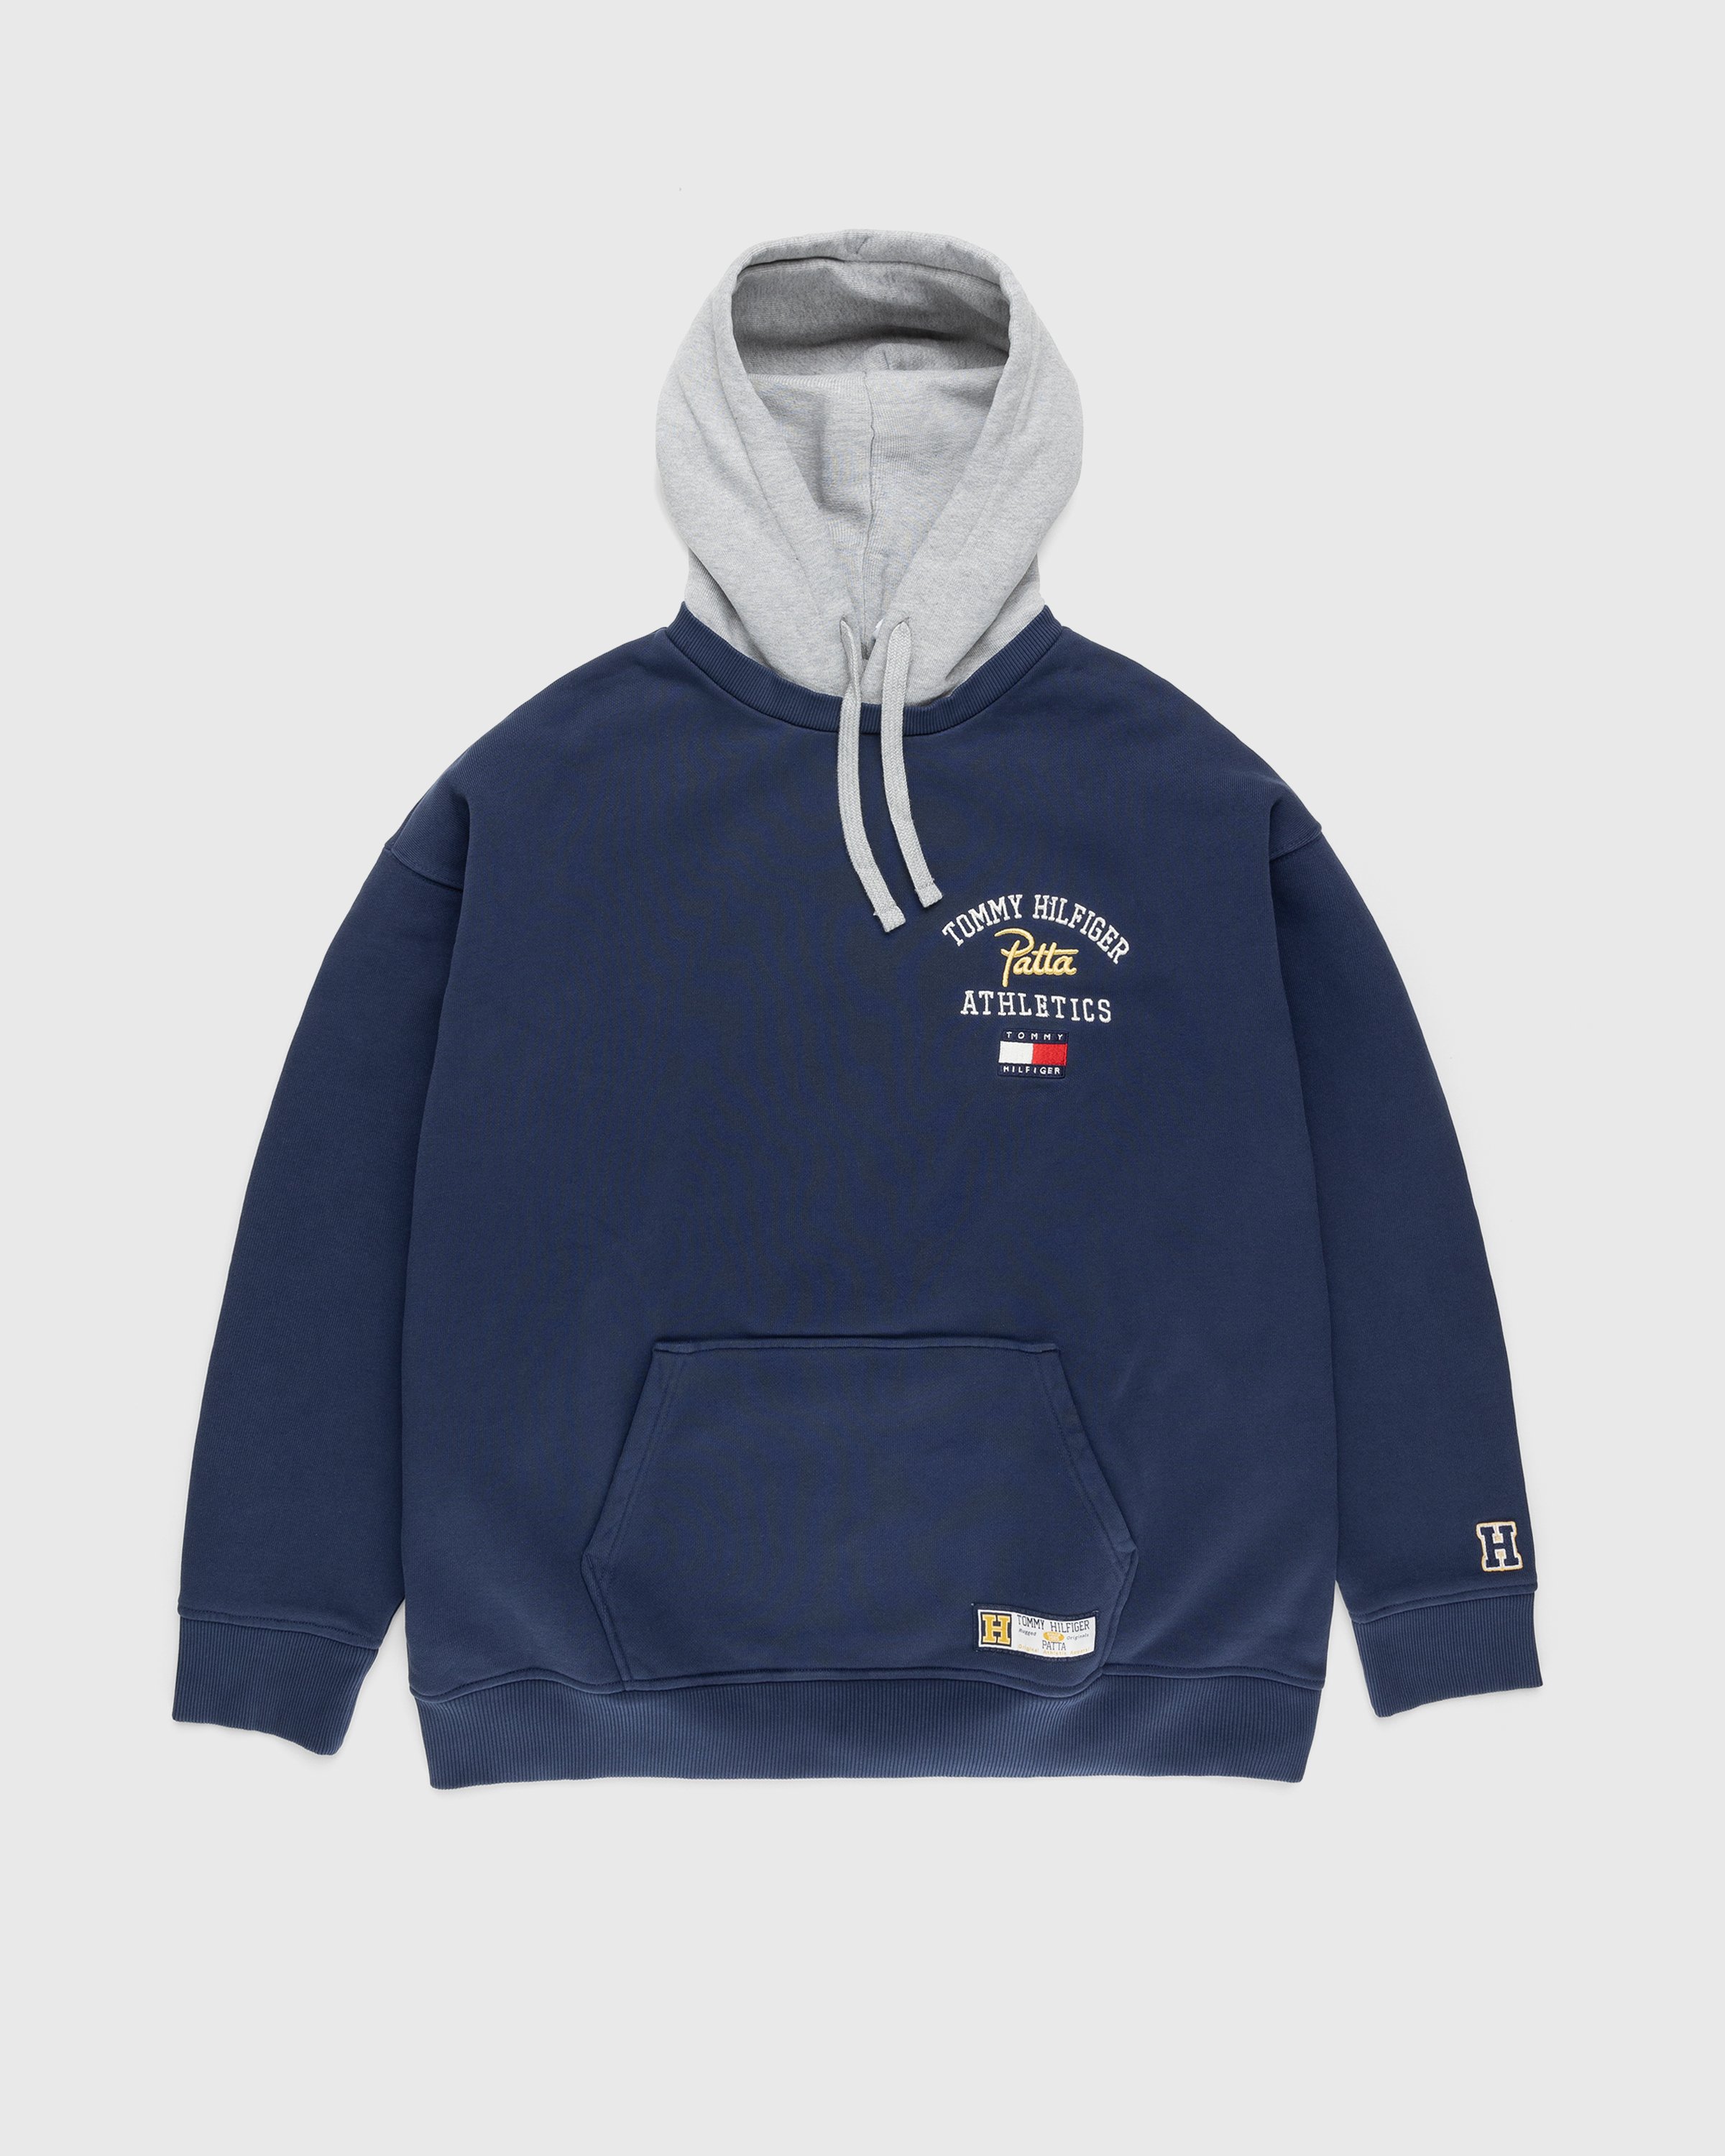 Patta x Tommy Hilfiger - Hoodie Sport Navy - Clothing - Blue - Image 1